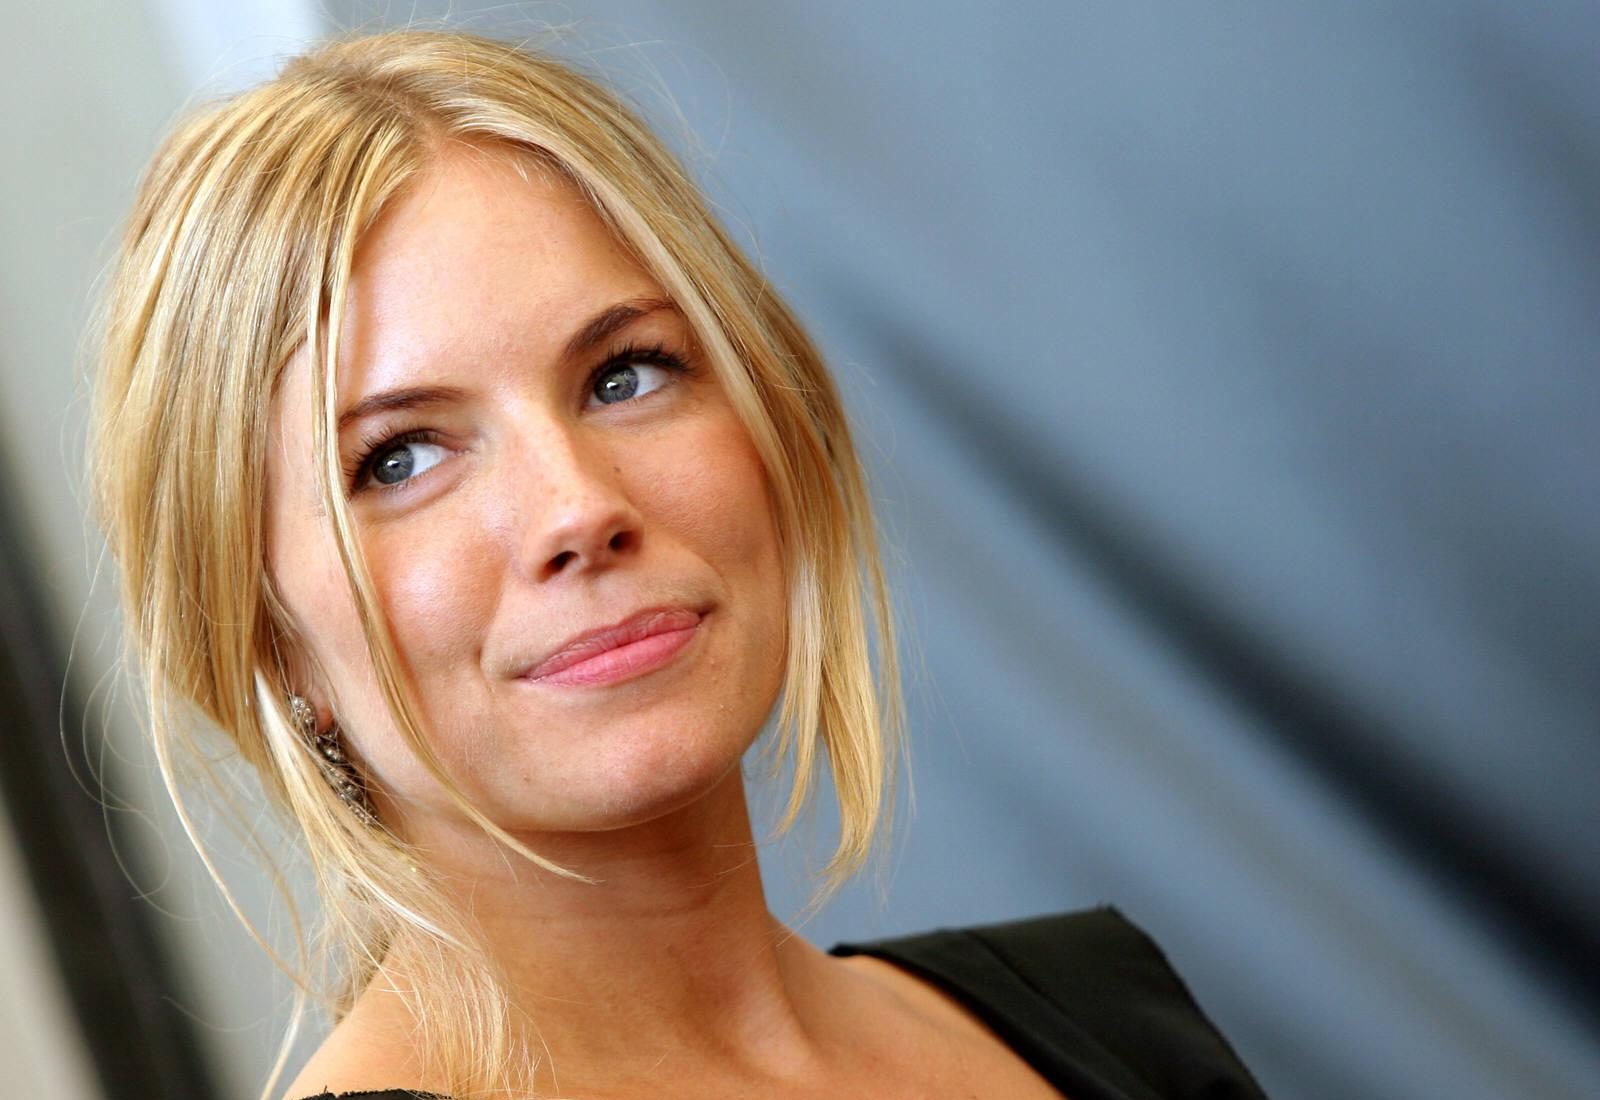 Who Is Sienna Miller Dating?